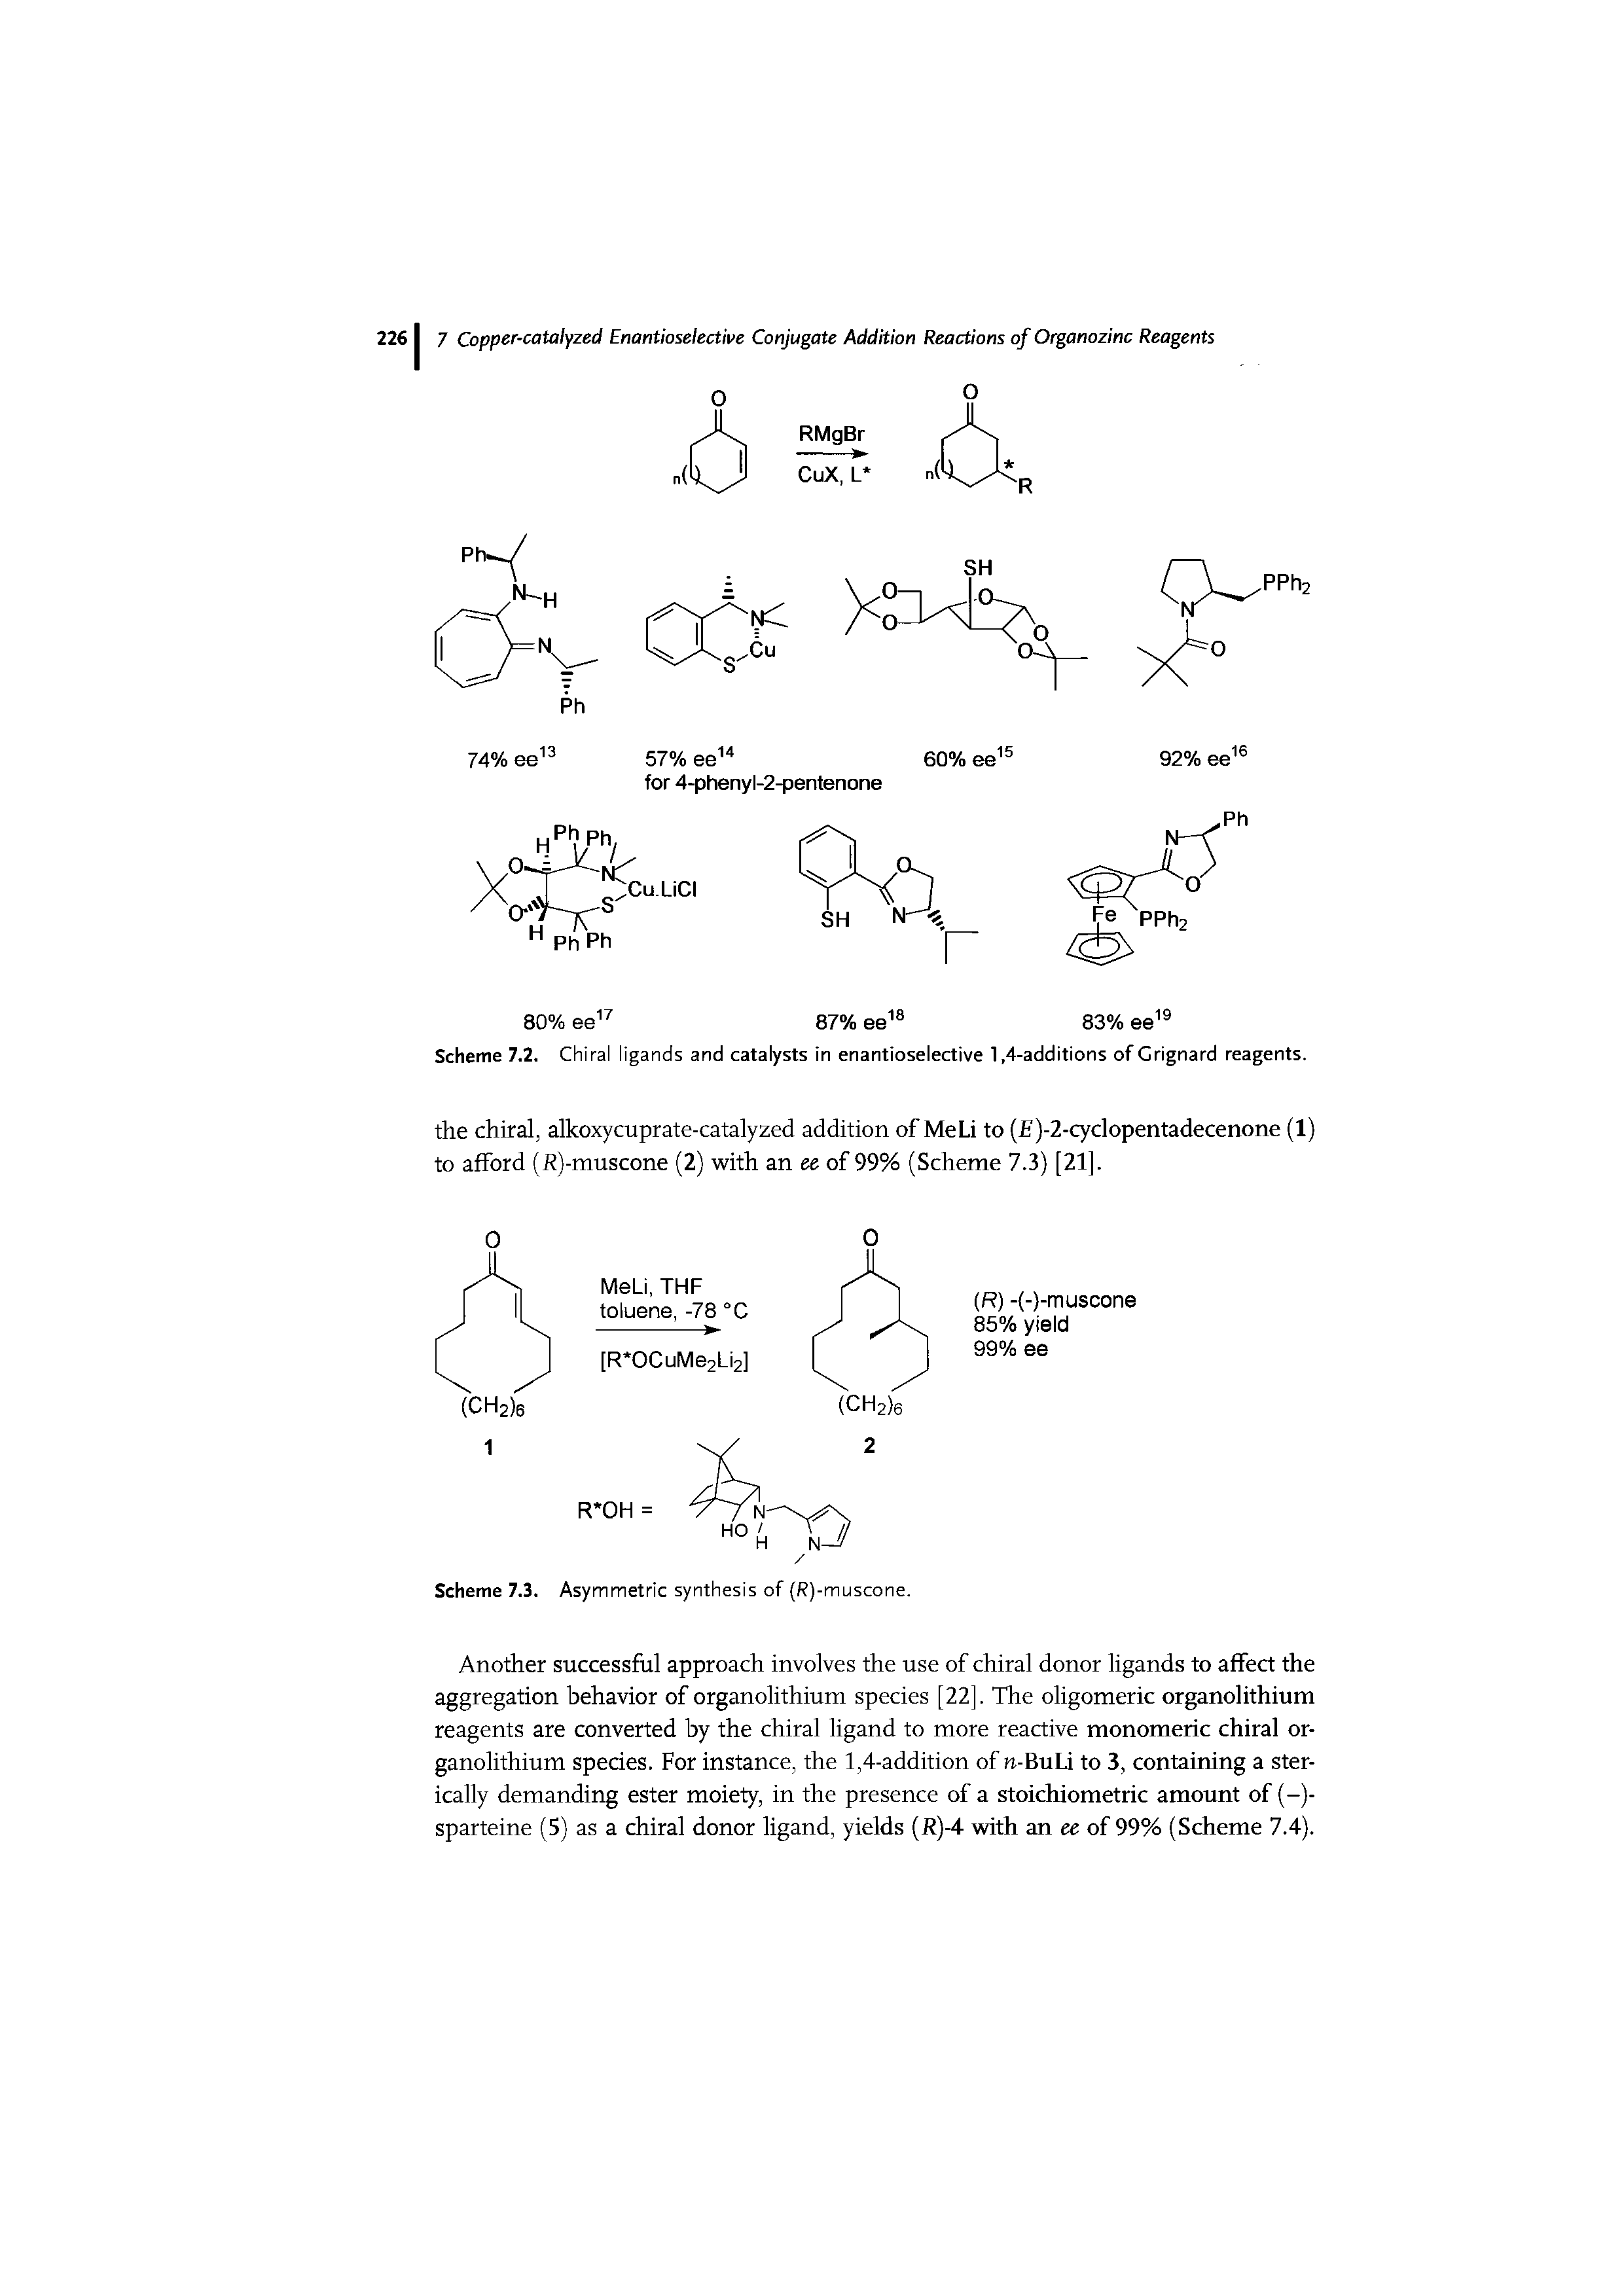 Scheme 7.2. Chiral ligands and catalysts in enantioselective 1,4-additions of Grignard reagents.